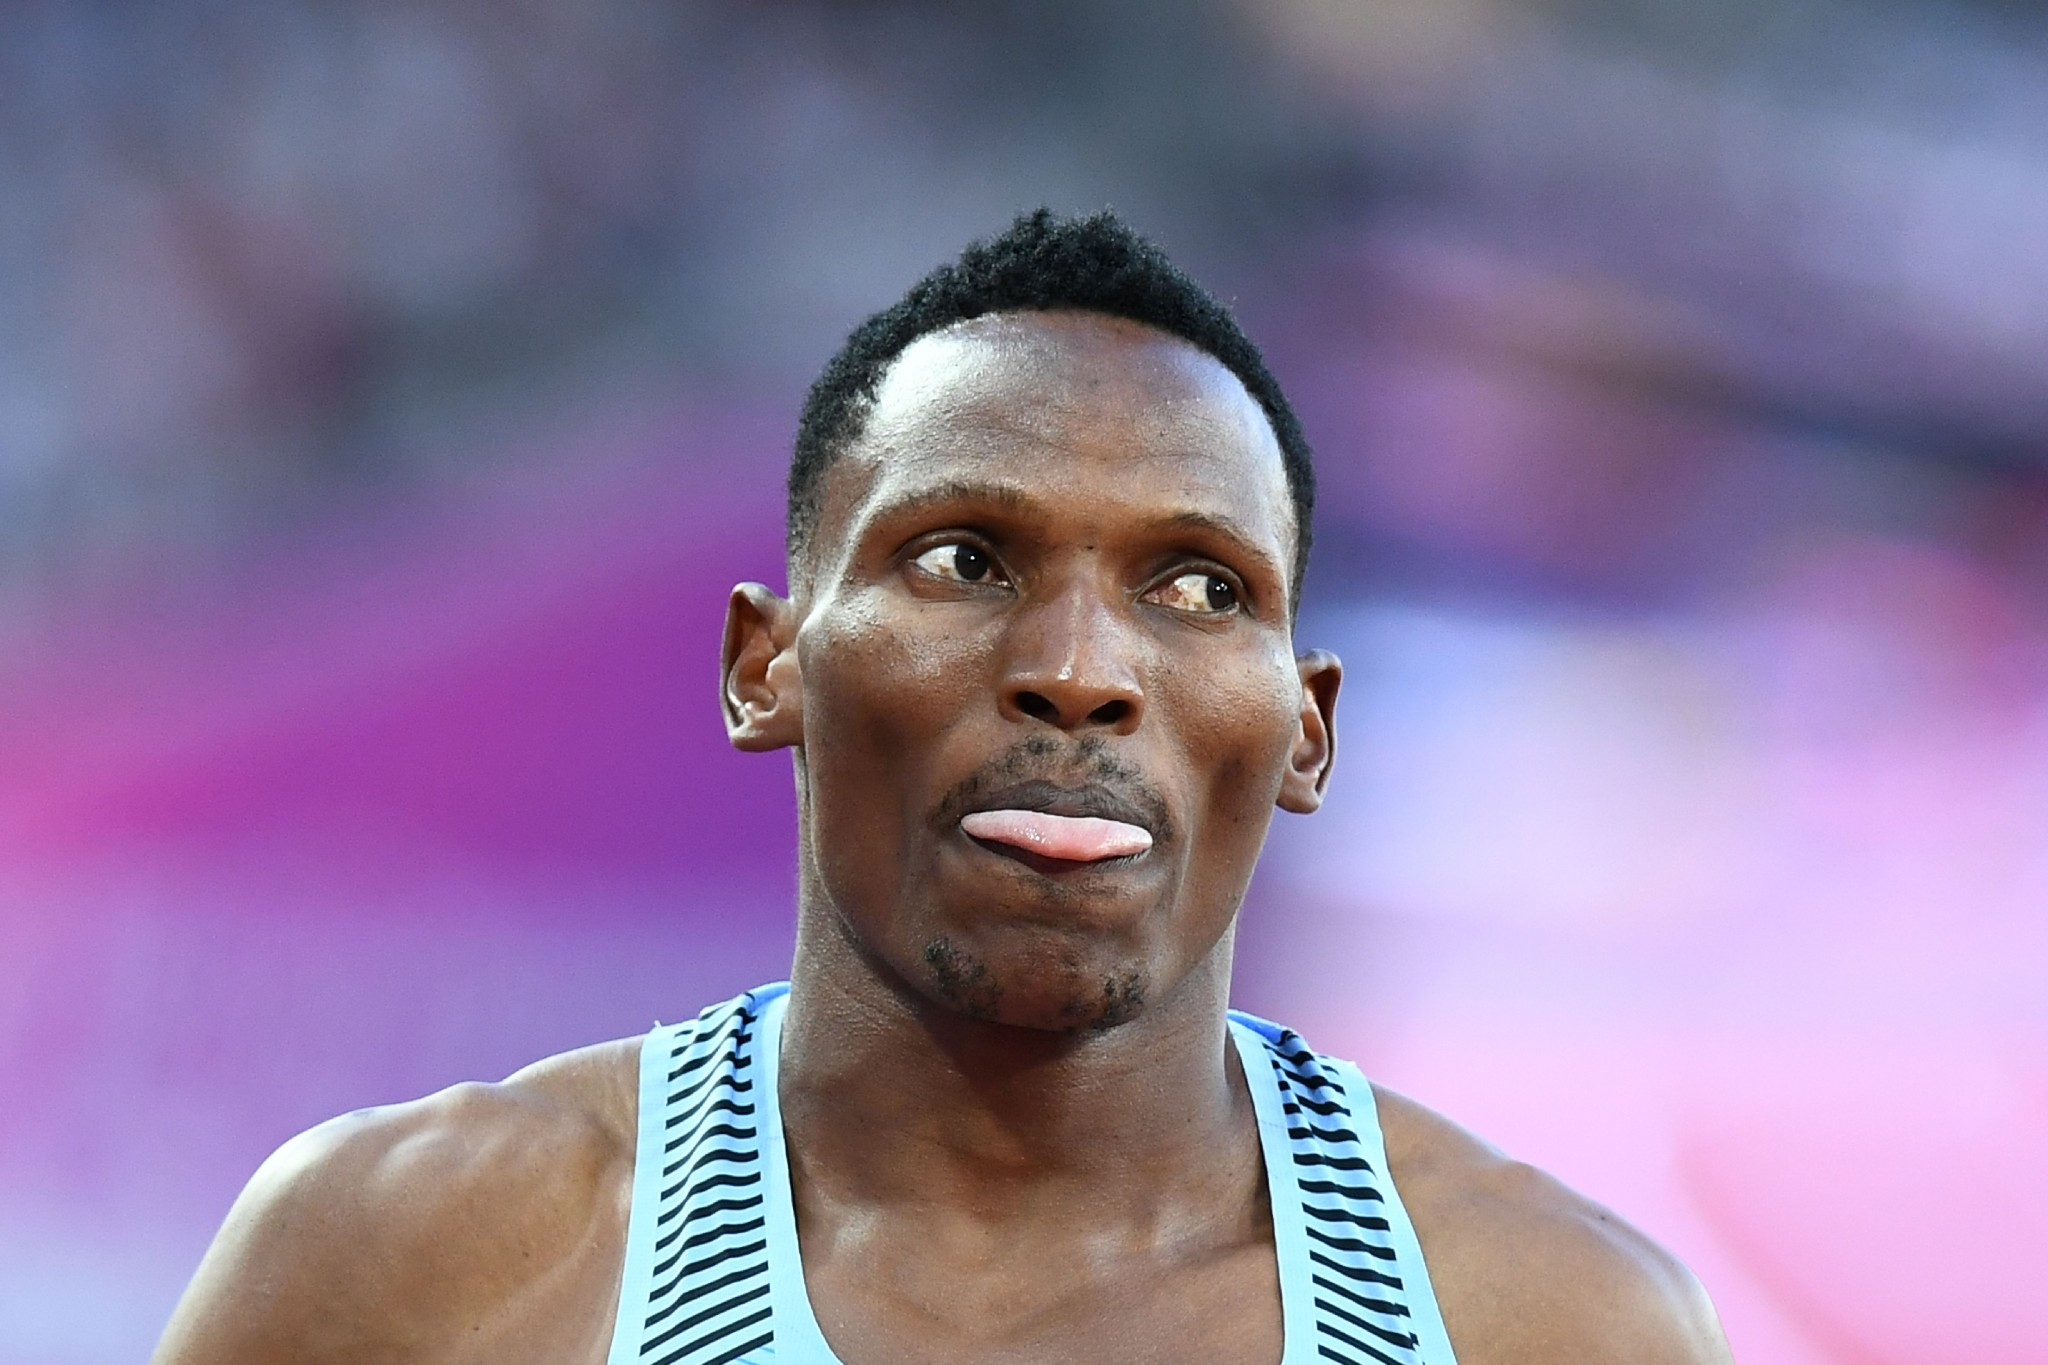 Isaac Makwala has been ruled out of the 400m final ©Getty Images